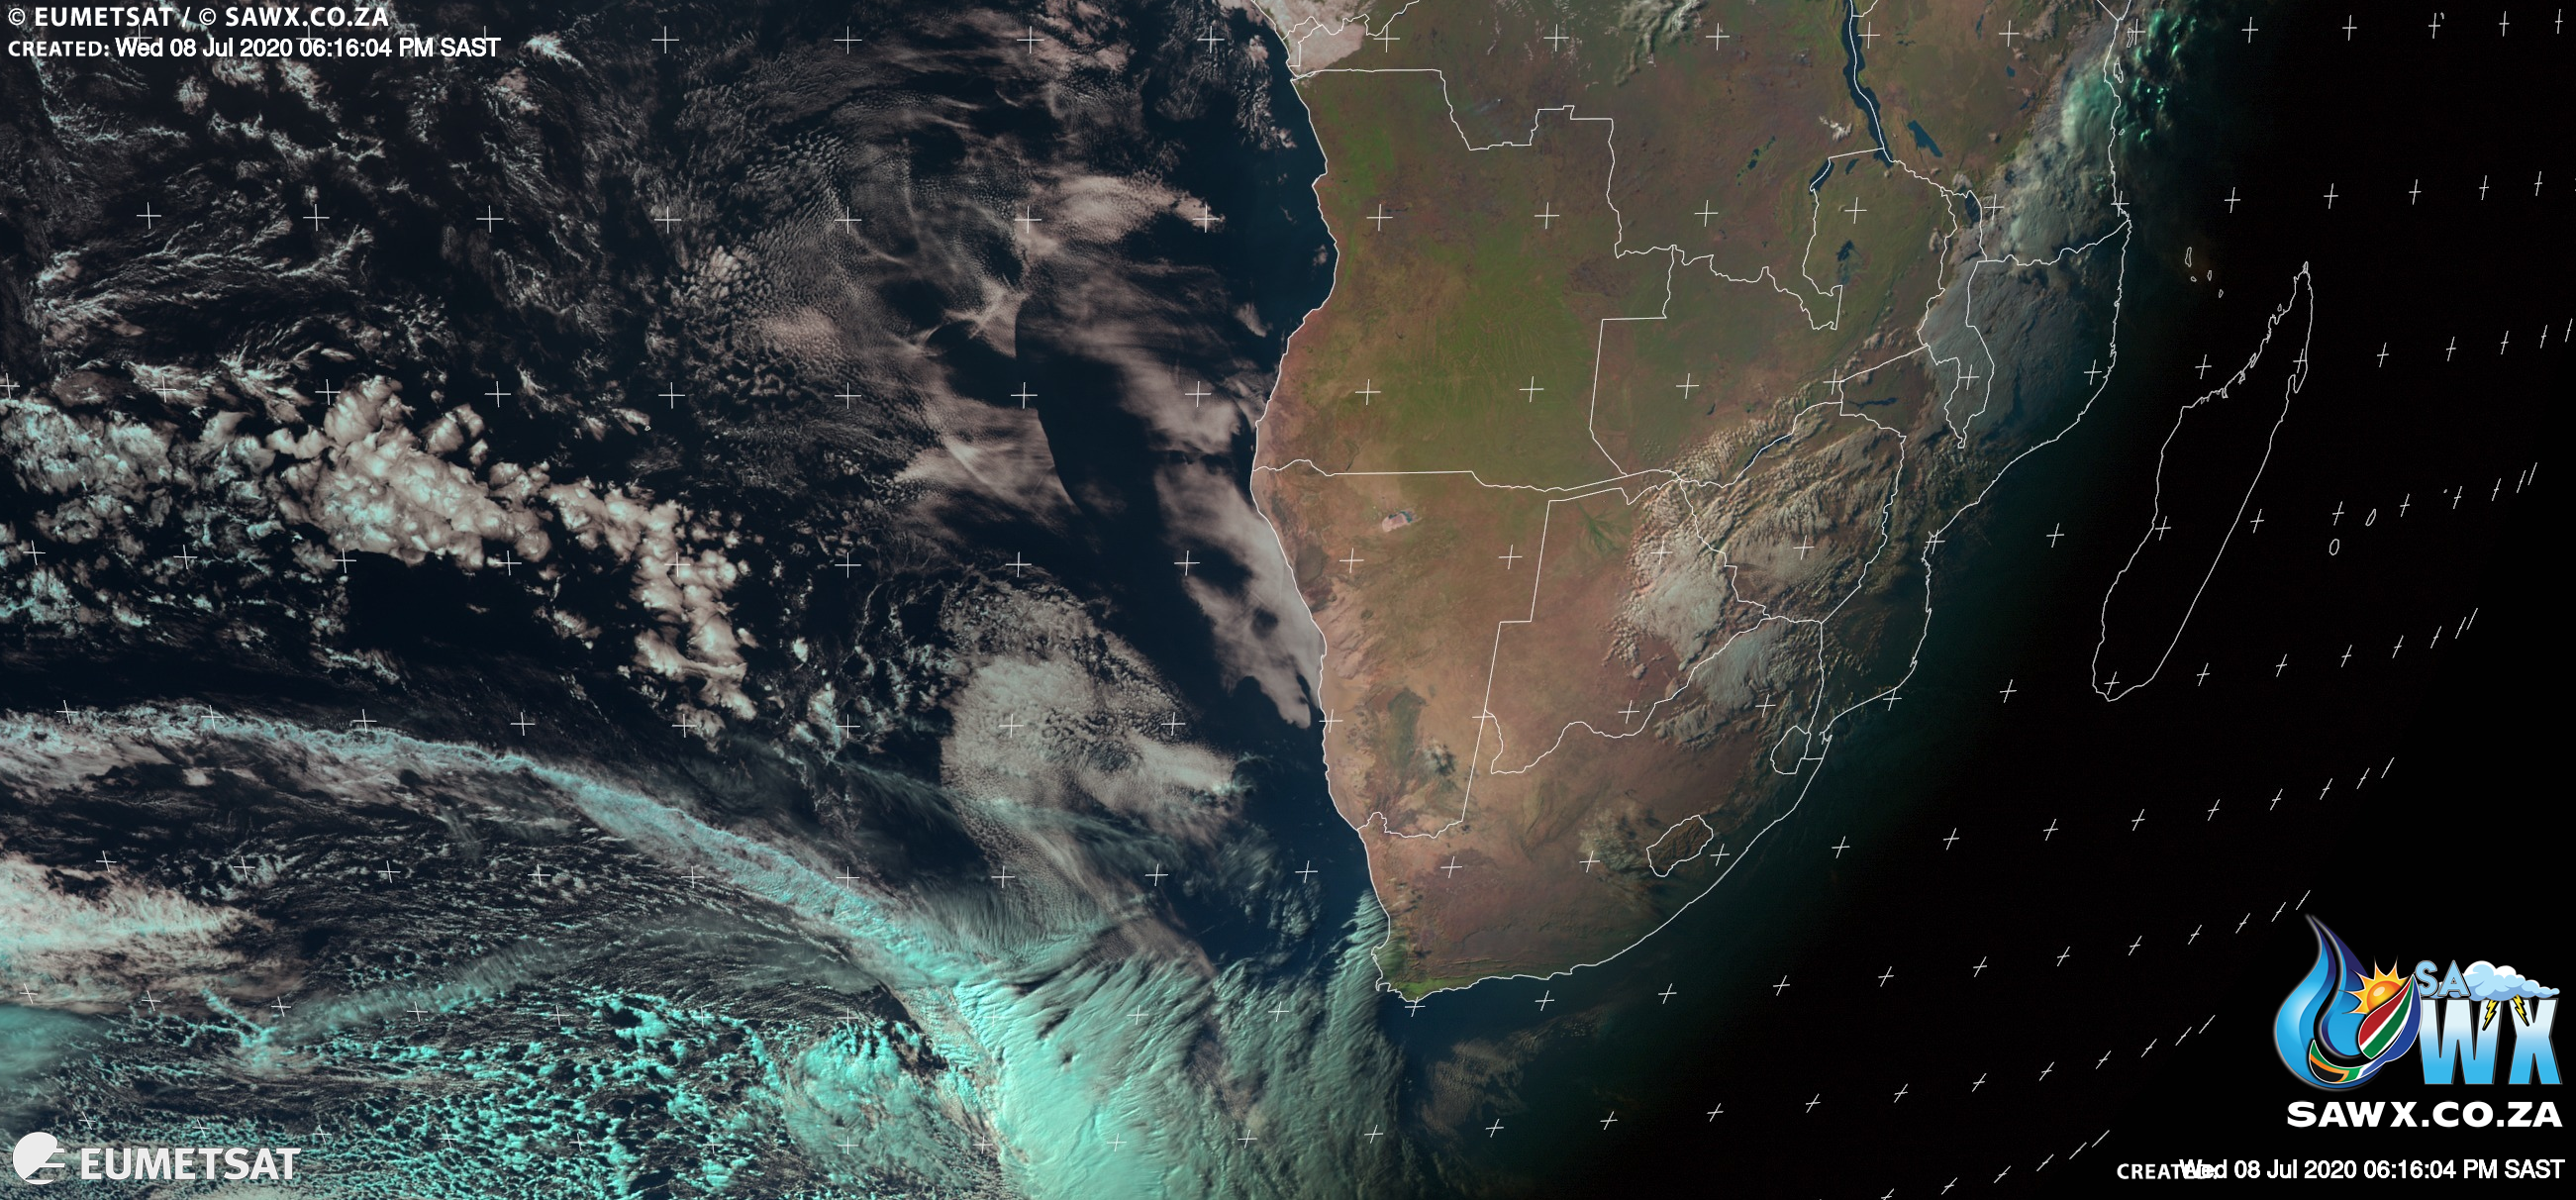 3 Cold Fronts to hit South Africa - Lesotho to see heaviest snowfall of all